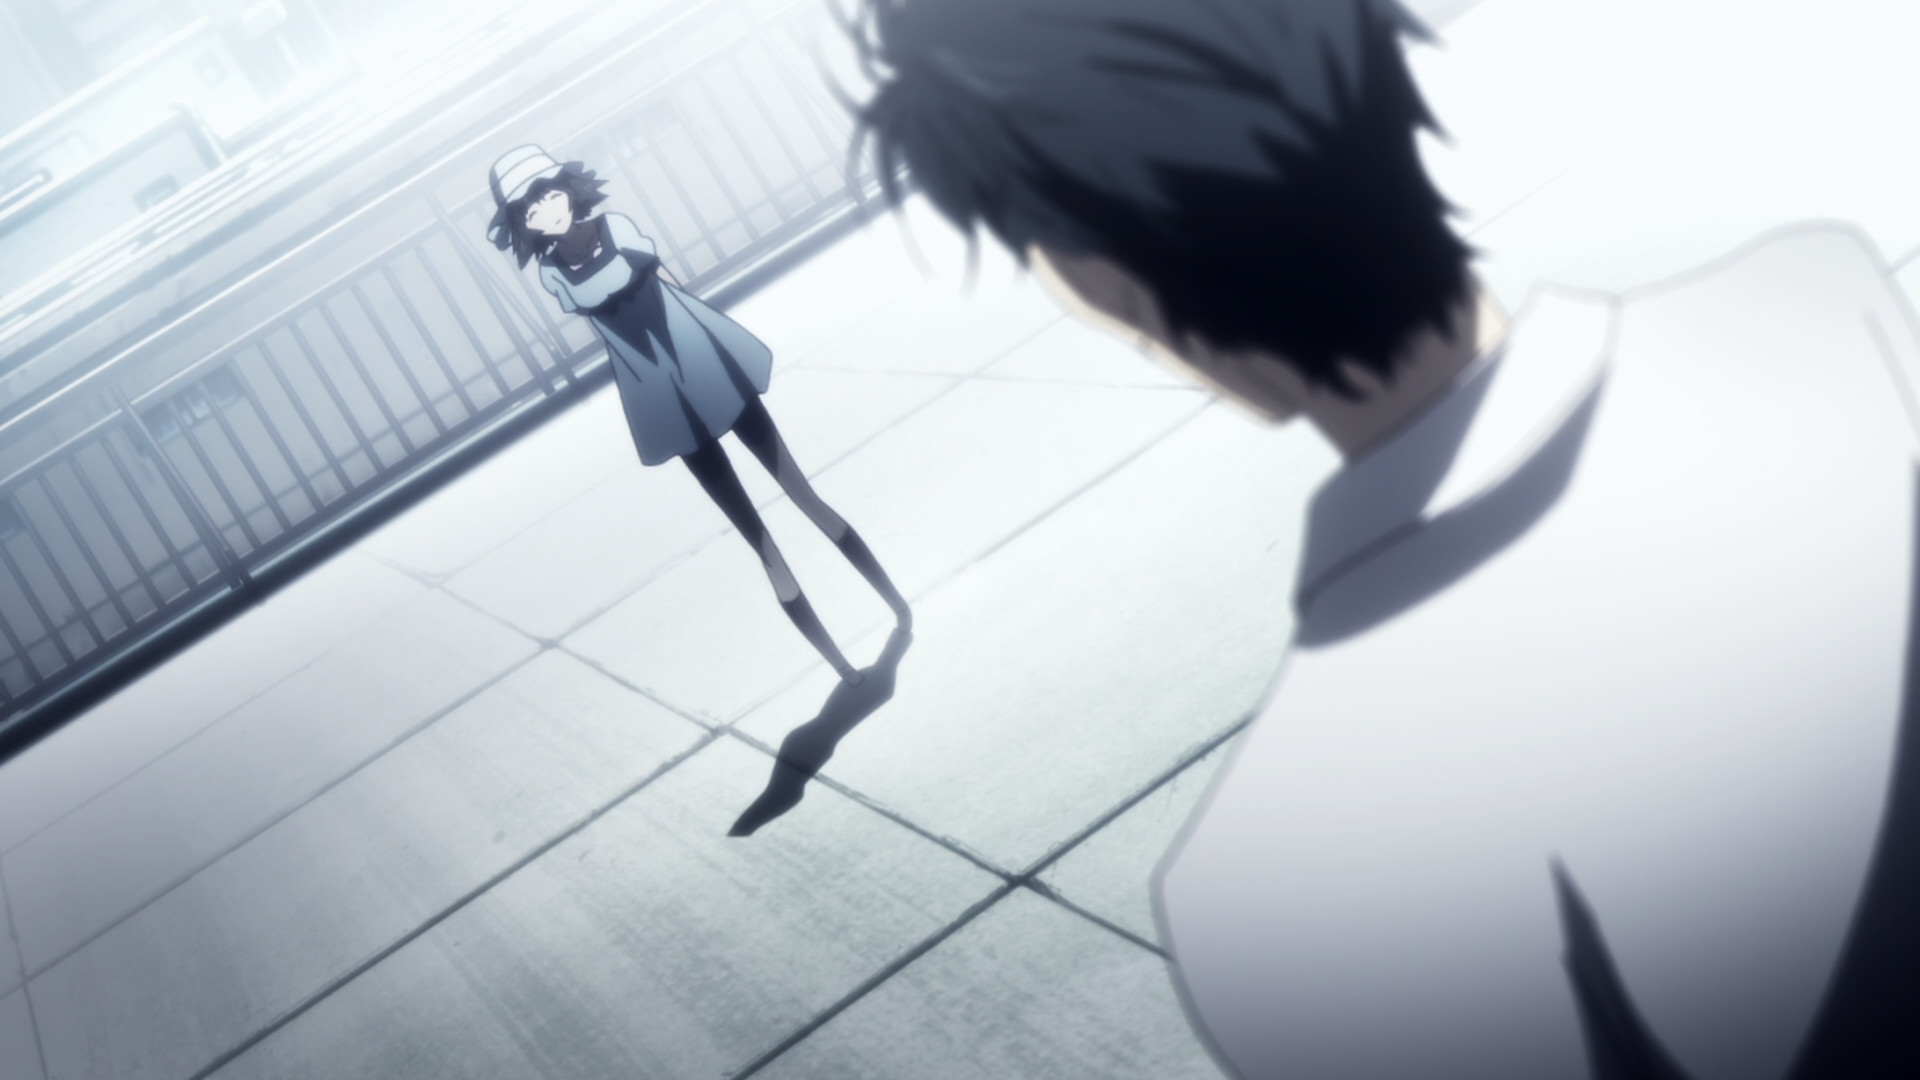 Steins;Gate Has the Best Use of Time Travel in Anime